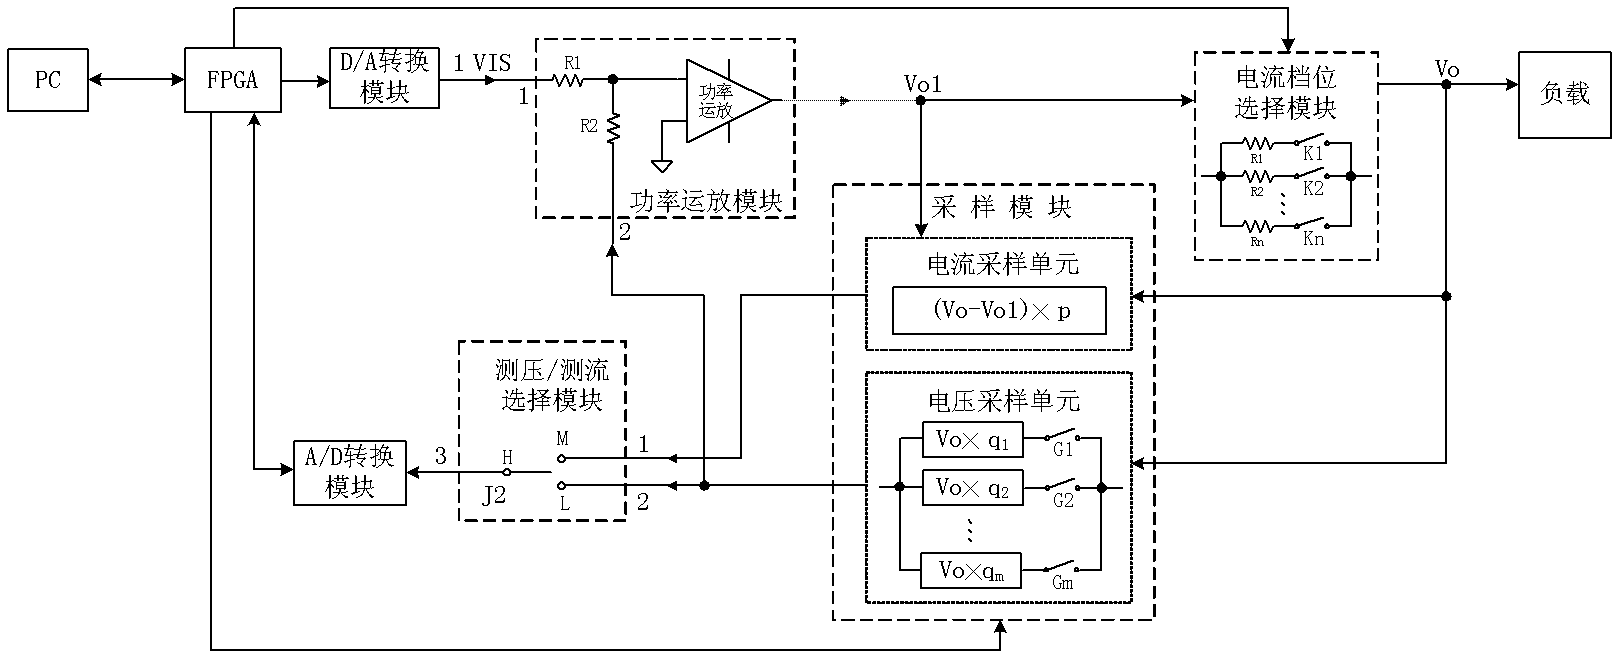 Numerical-control direct-current voltage source